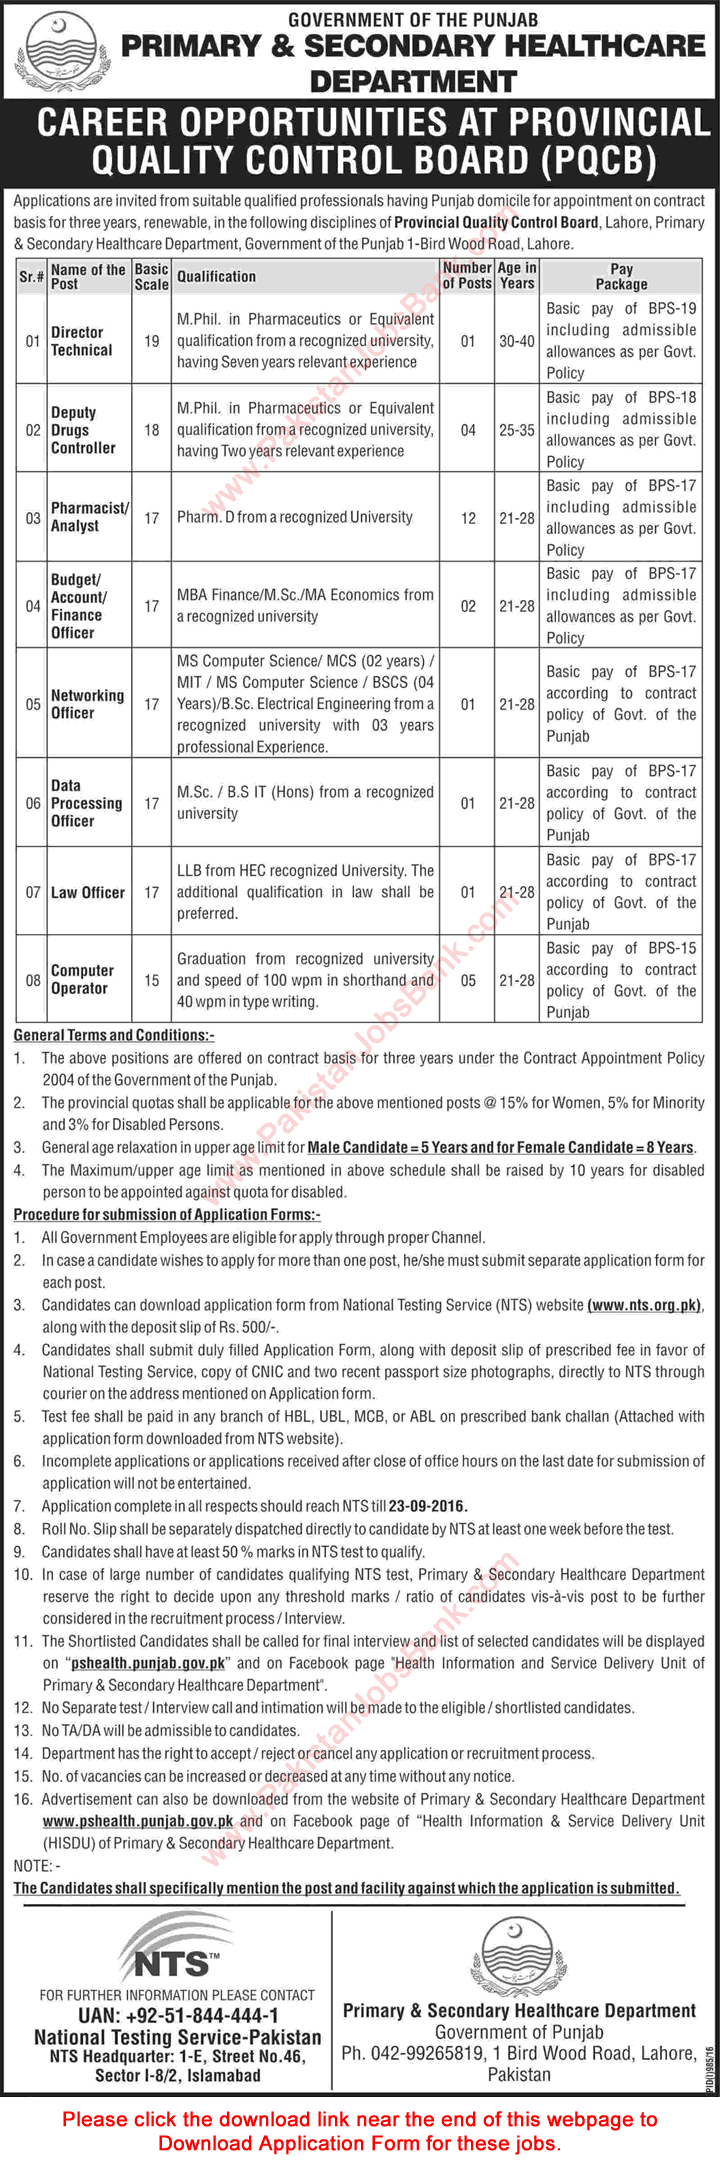 Primary and Secondary Healthcare Department Punjab Jobs August 2016 NTS Application Form PQCB Latest